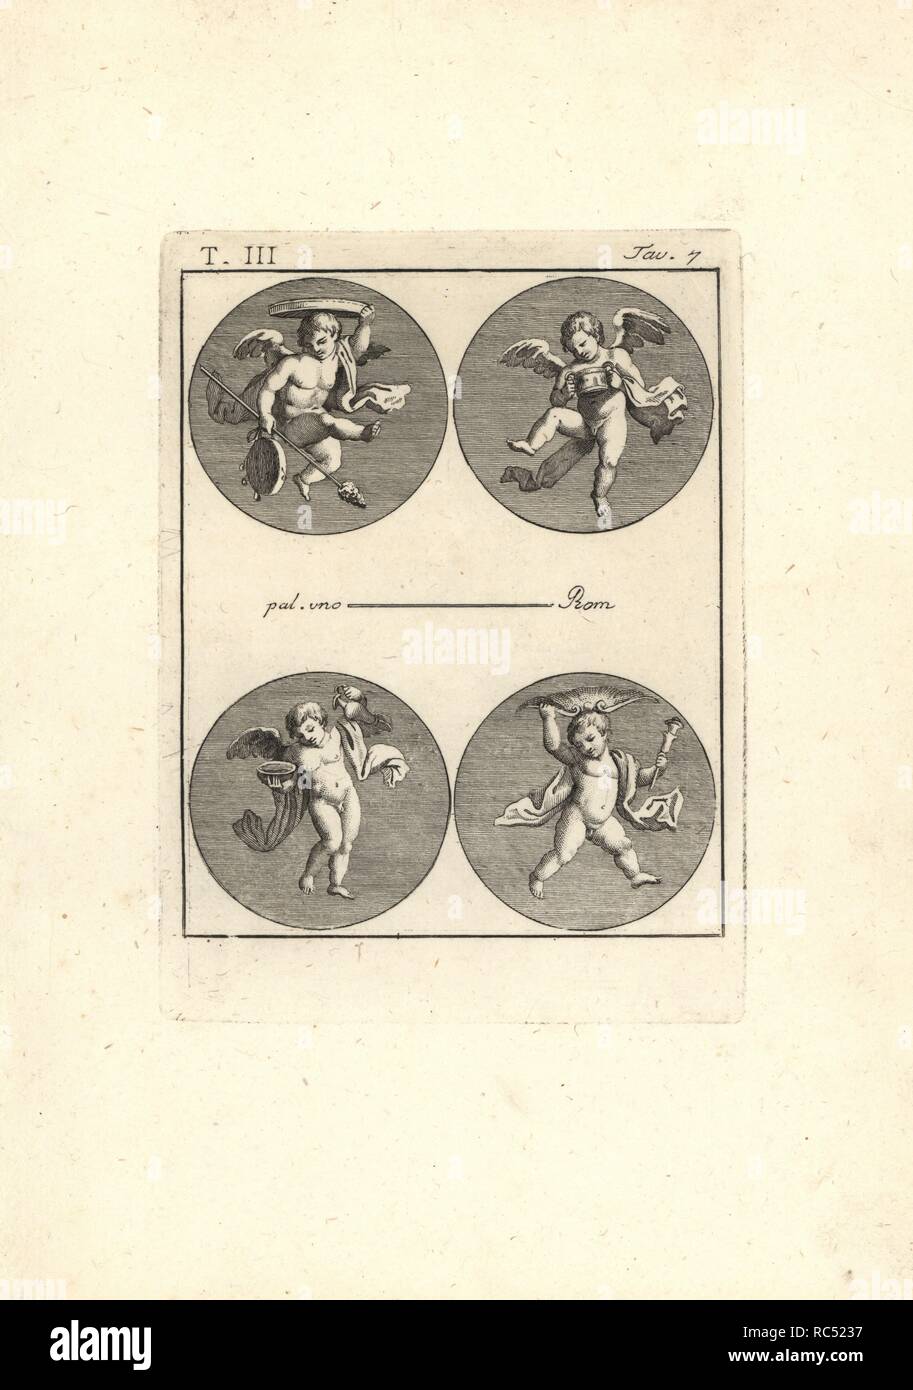 Four putti with symbols of Bacchus: dancer with thyrsus and cembalo, putto with two-handled vase, putto with vase and basin of water and wine, and putto with scepter and basin of Venus. Copperplate engraving by Tommaso Piroli from his Antiquities of Herculaneum (Antichita di Ercolano), Rome, 1790. Stock Photo